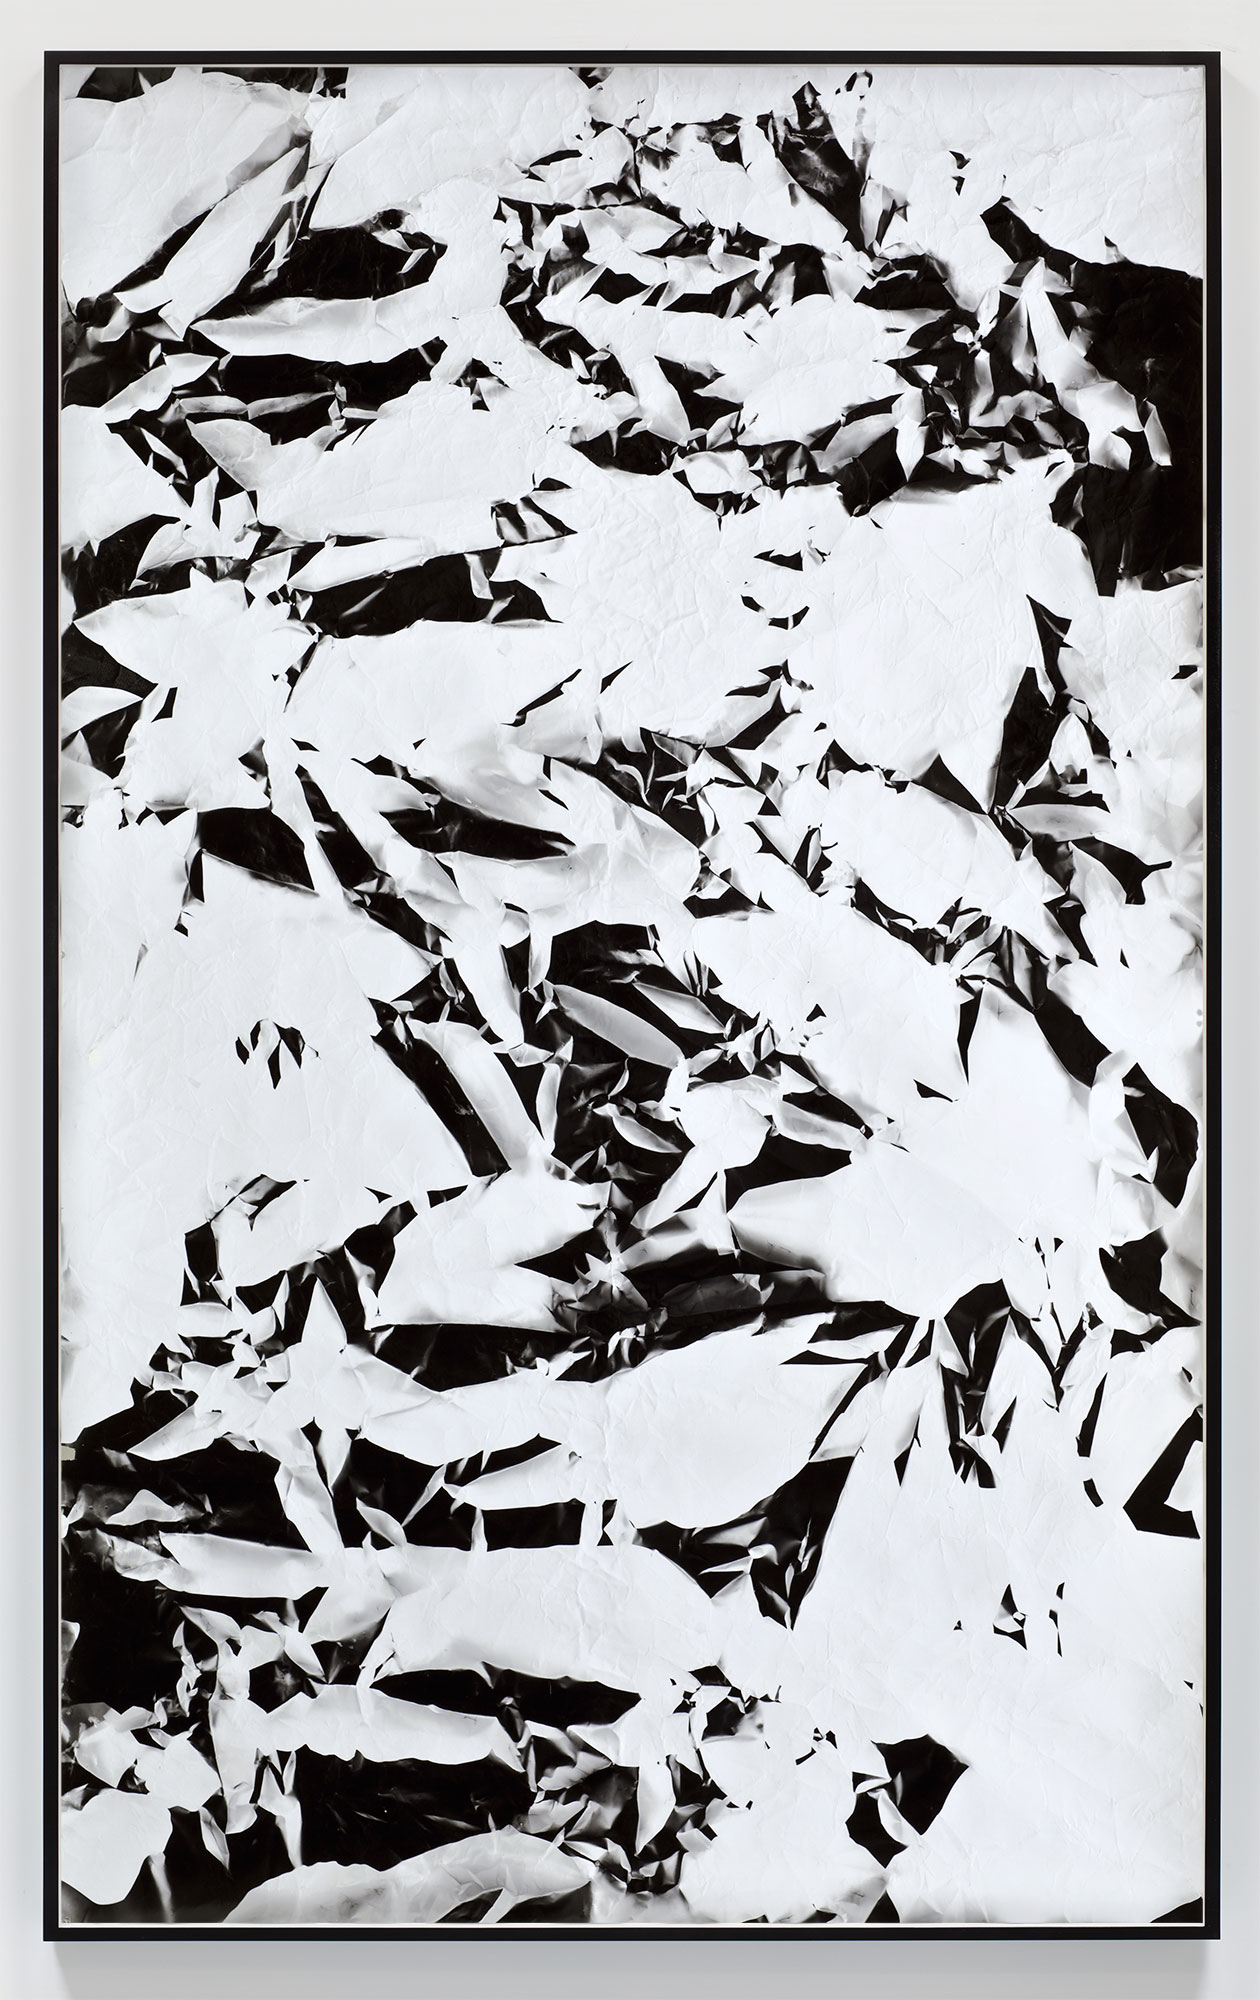   Picture Made by My Hand with the Assistance of Light   2011  Black and white fiber based photographic paper  89 x 55 inches    